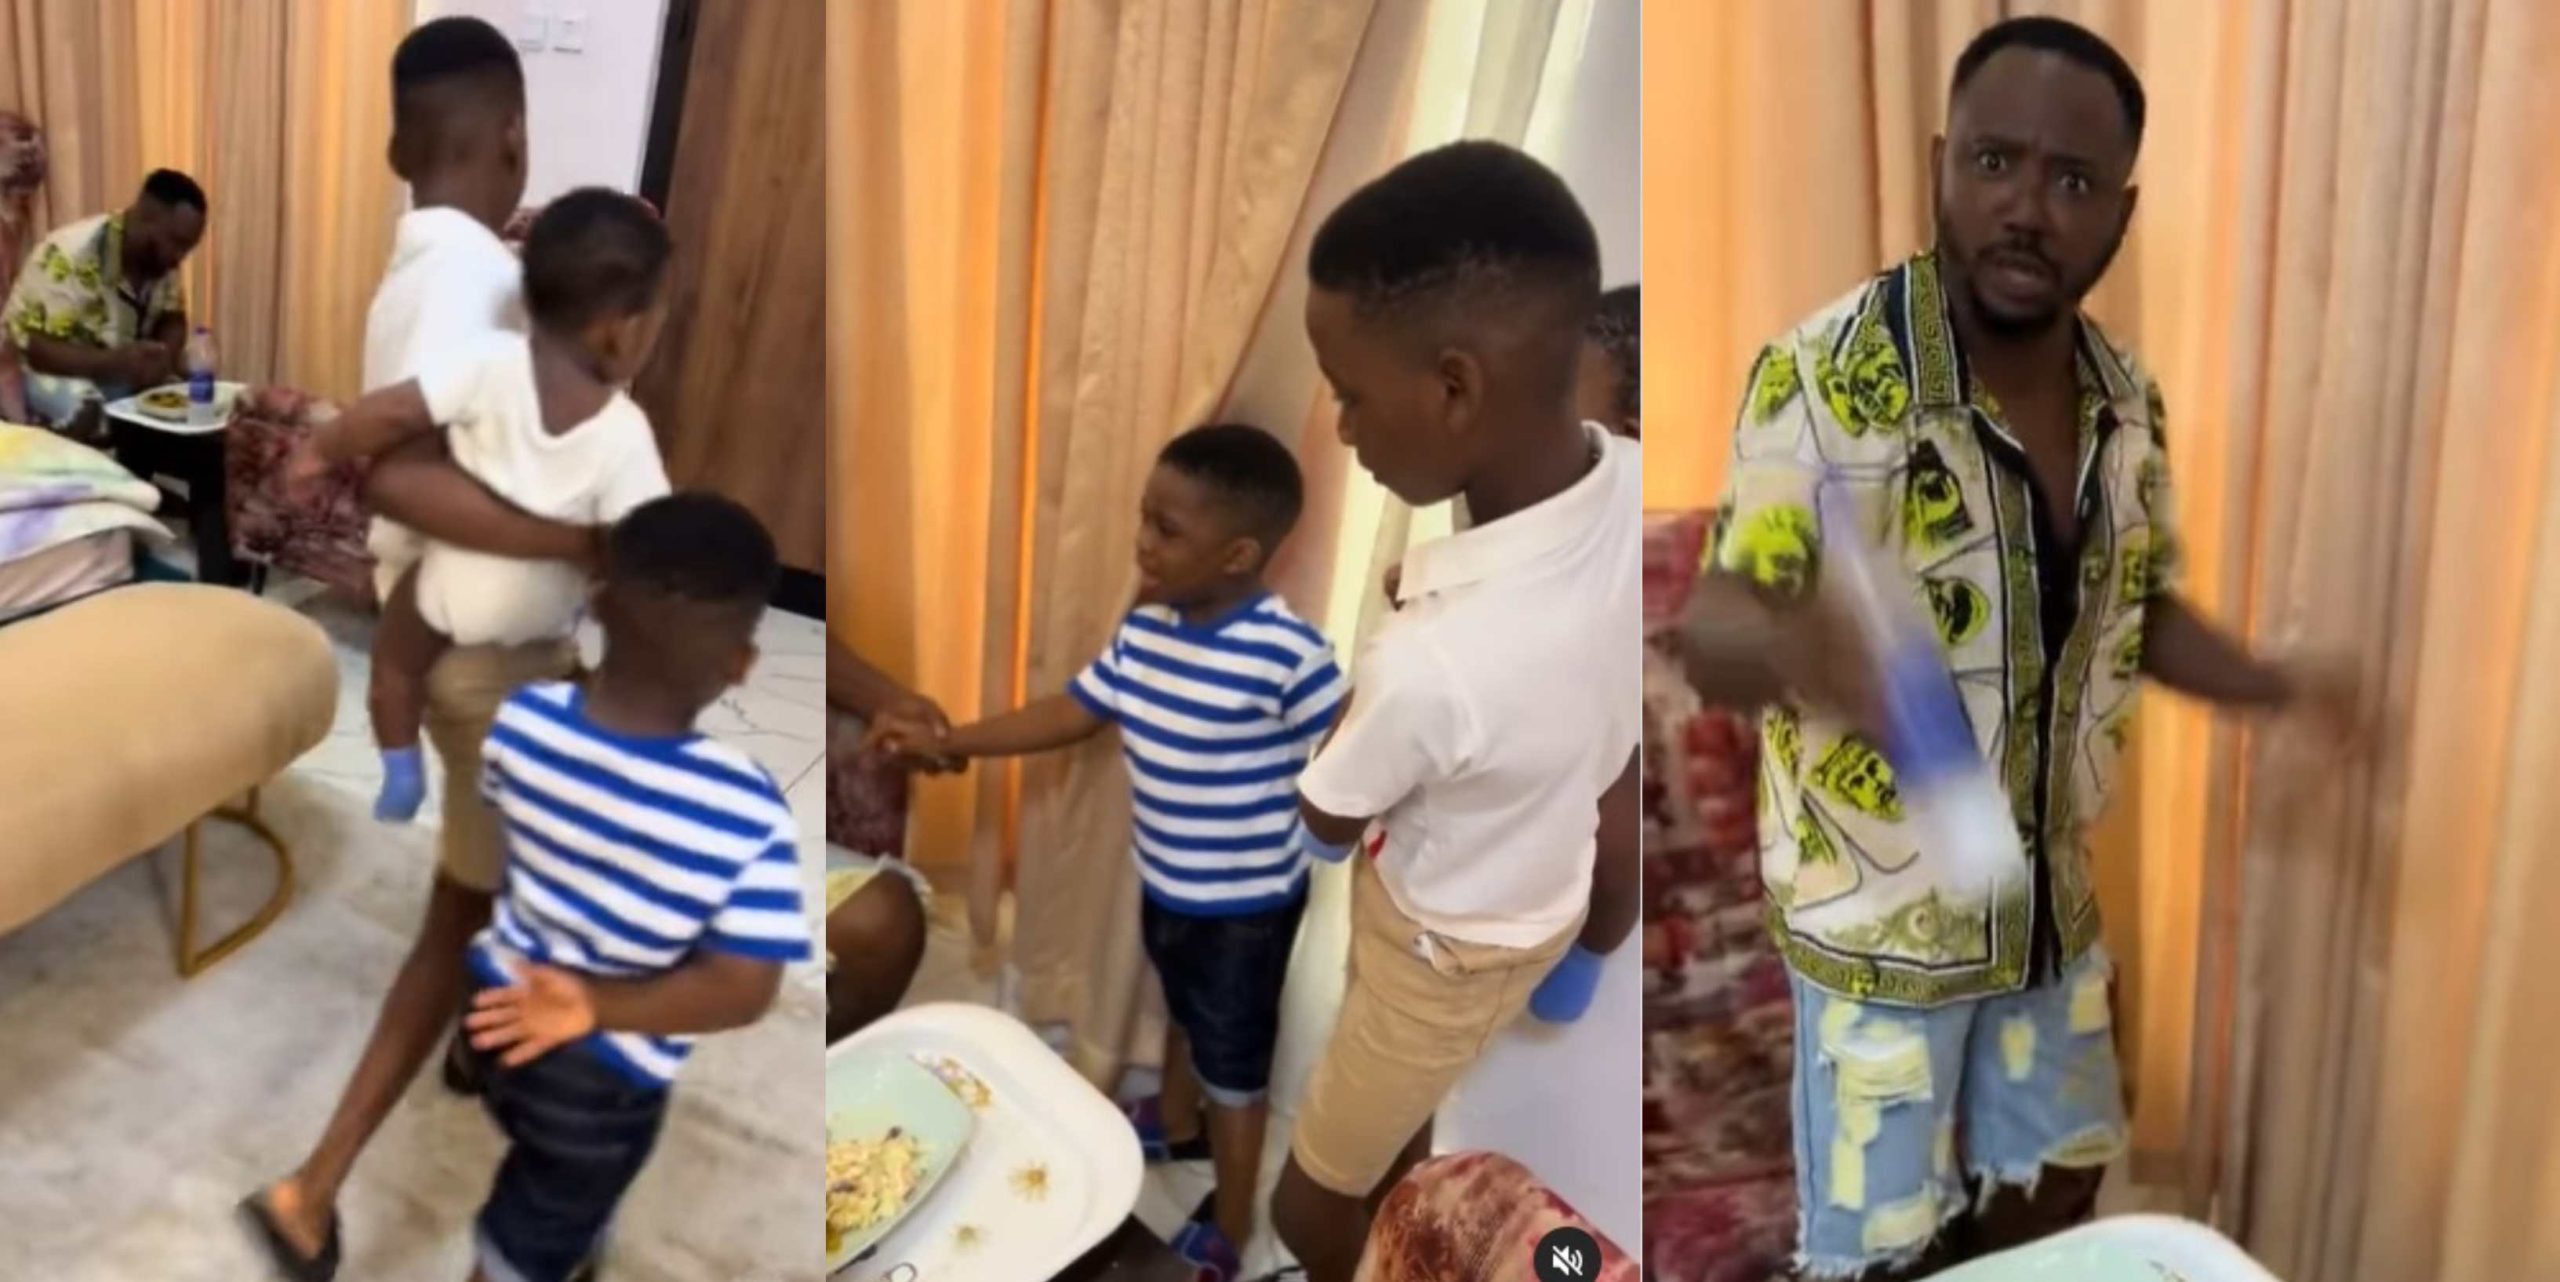 Man reacts as his wife sends his 3 sons to him to tell him they need a baby sister while eating